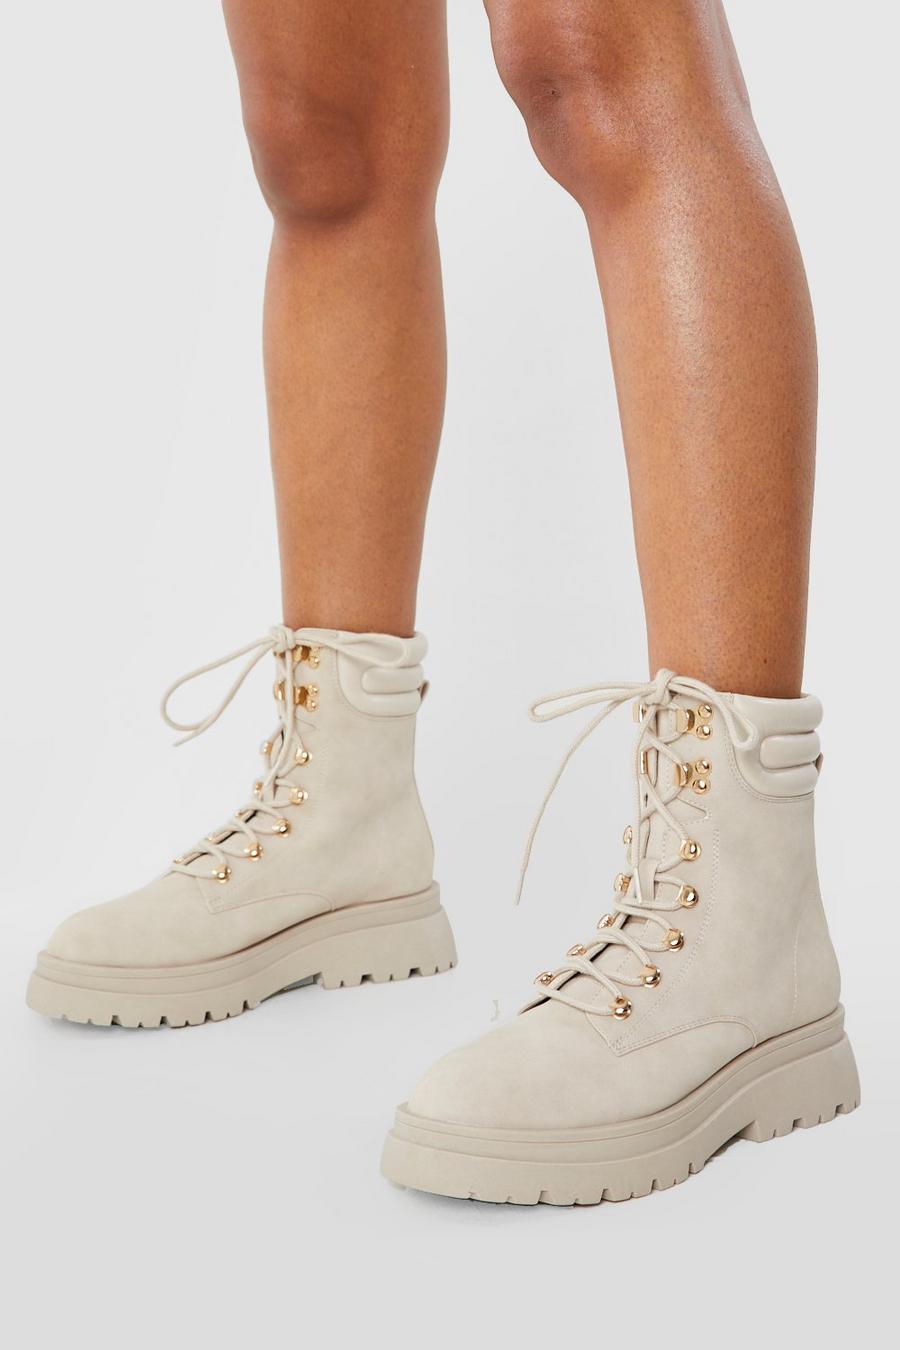 Beige Cleated Sole Lace Up Hiker Boots image number 1